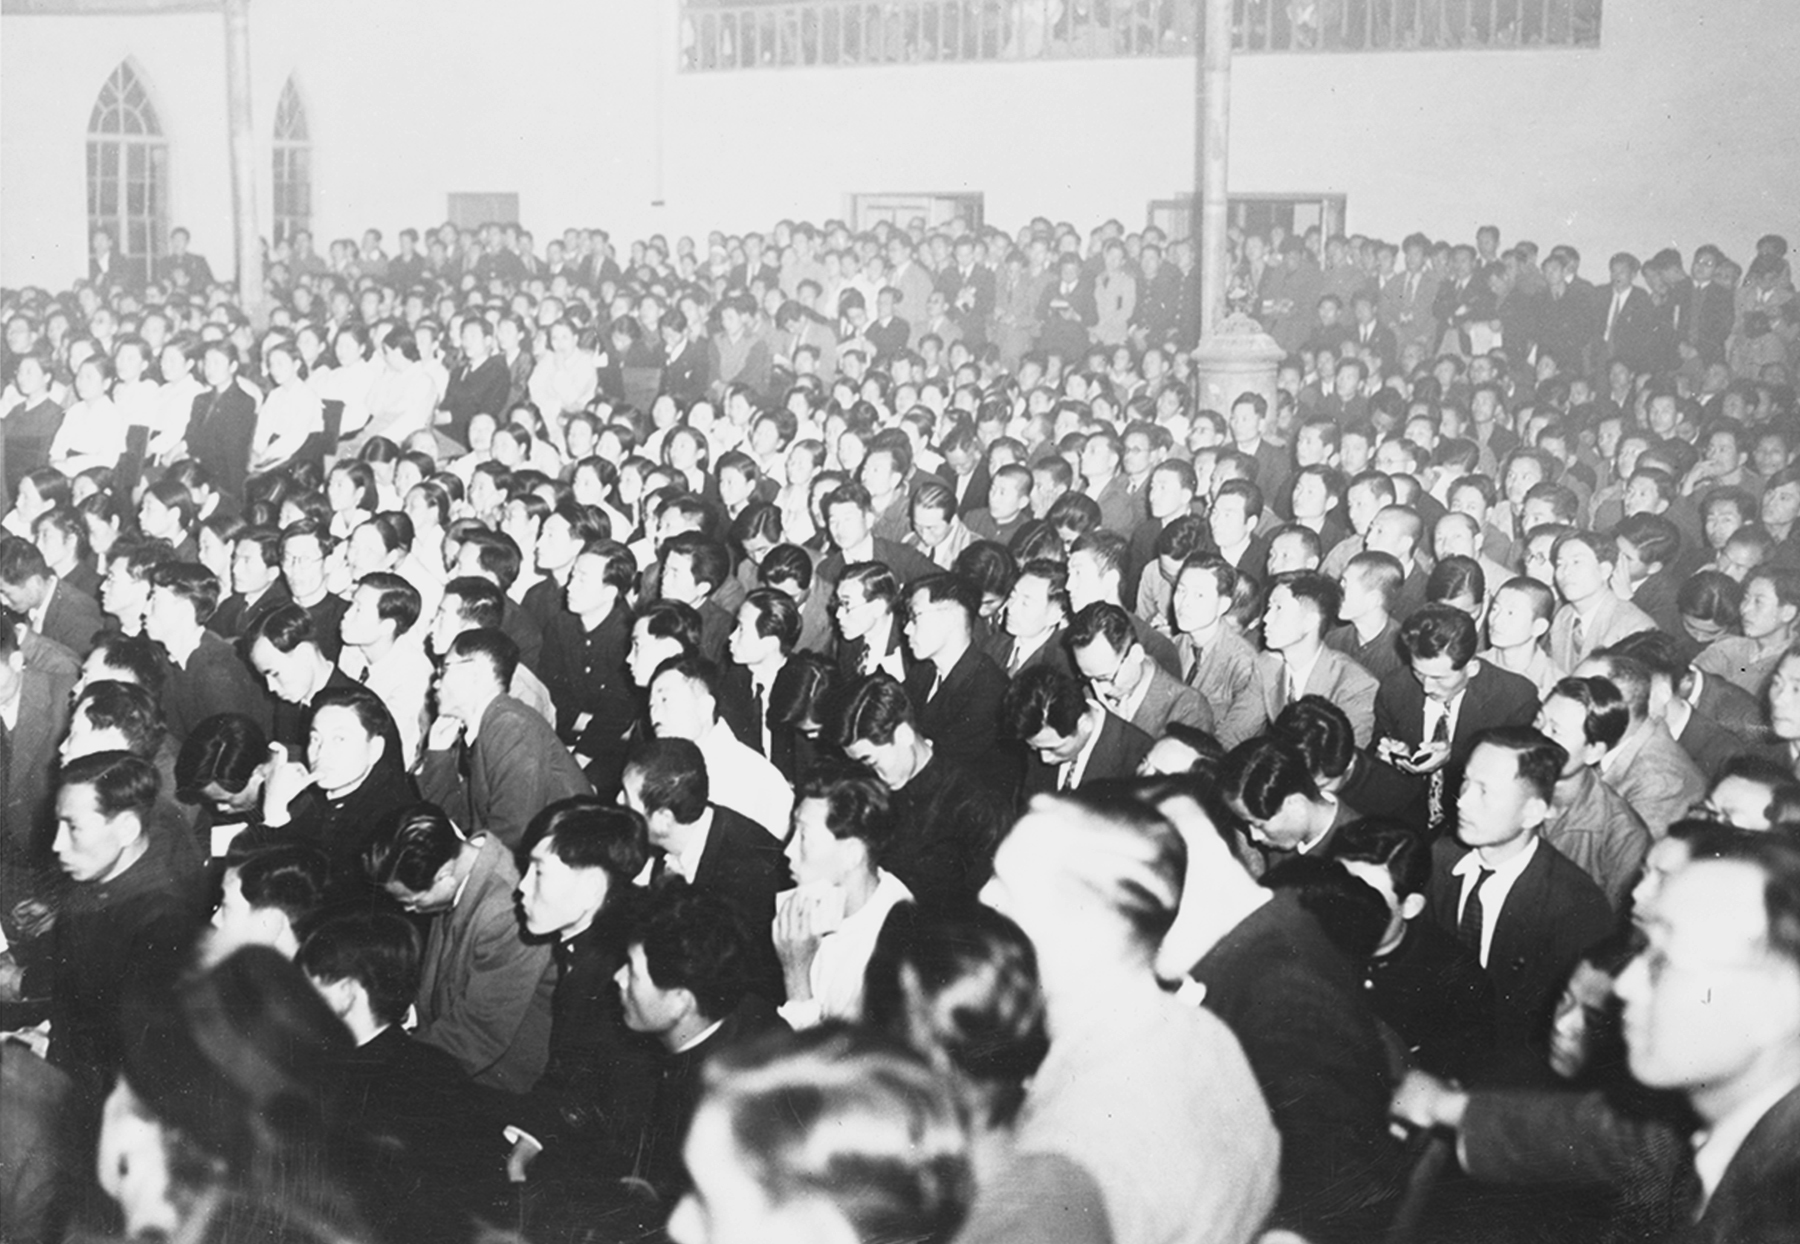 A thousand youth at the Presbyterian youth conference listening to Dr. John A. Mackay’s address, November 1949. Pearl: 146117